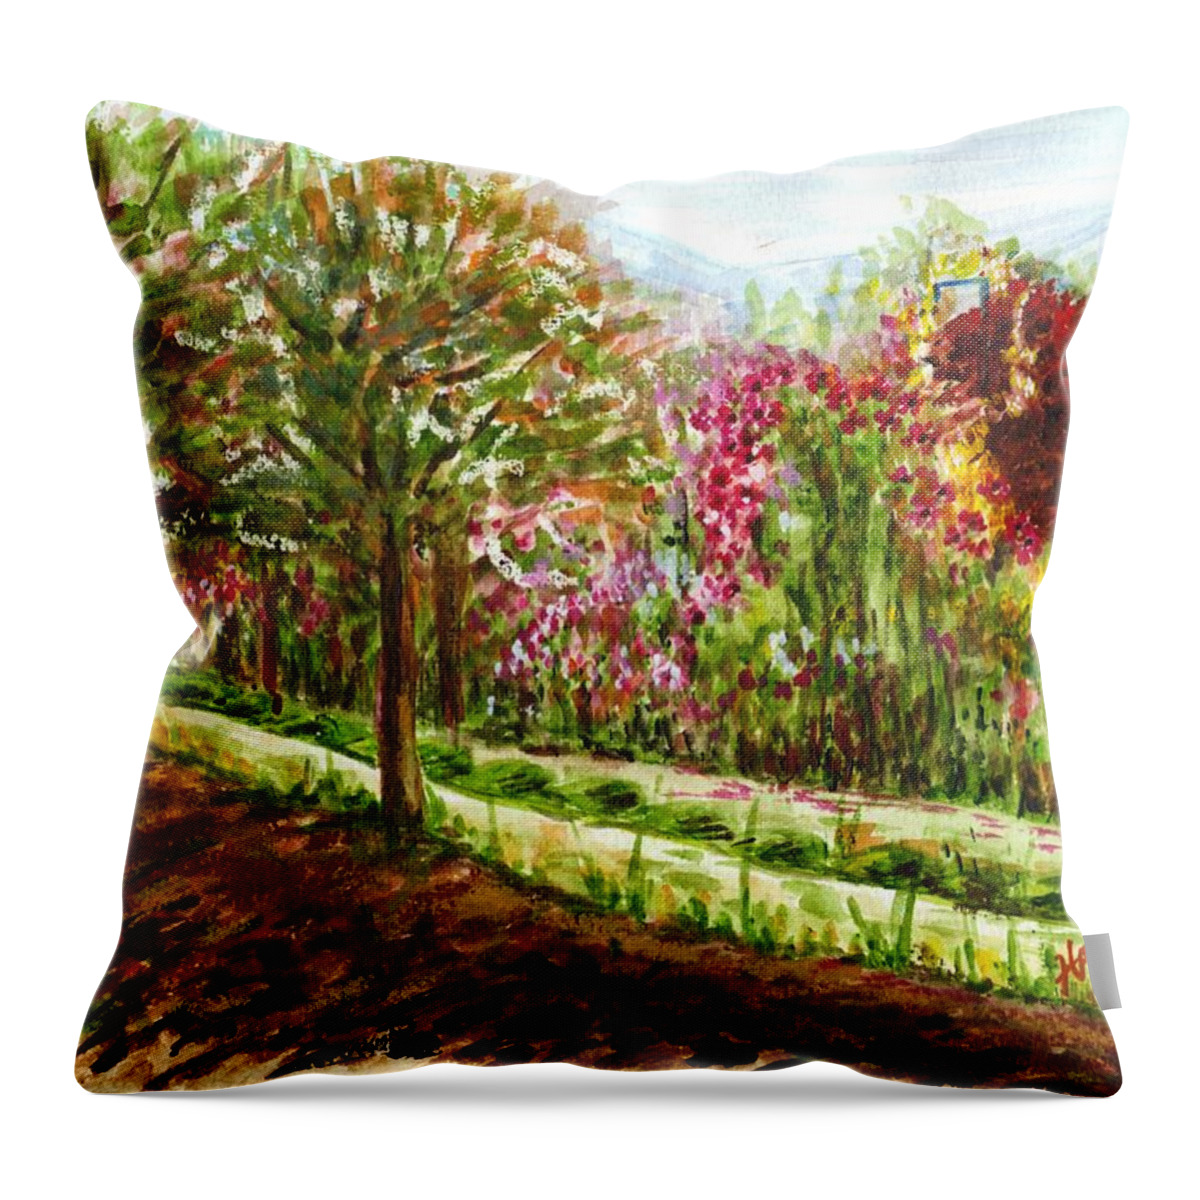 Landscape Throw Pillow featuring the painting Landscape 2 by Harsh Malik